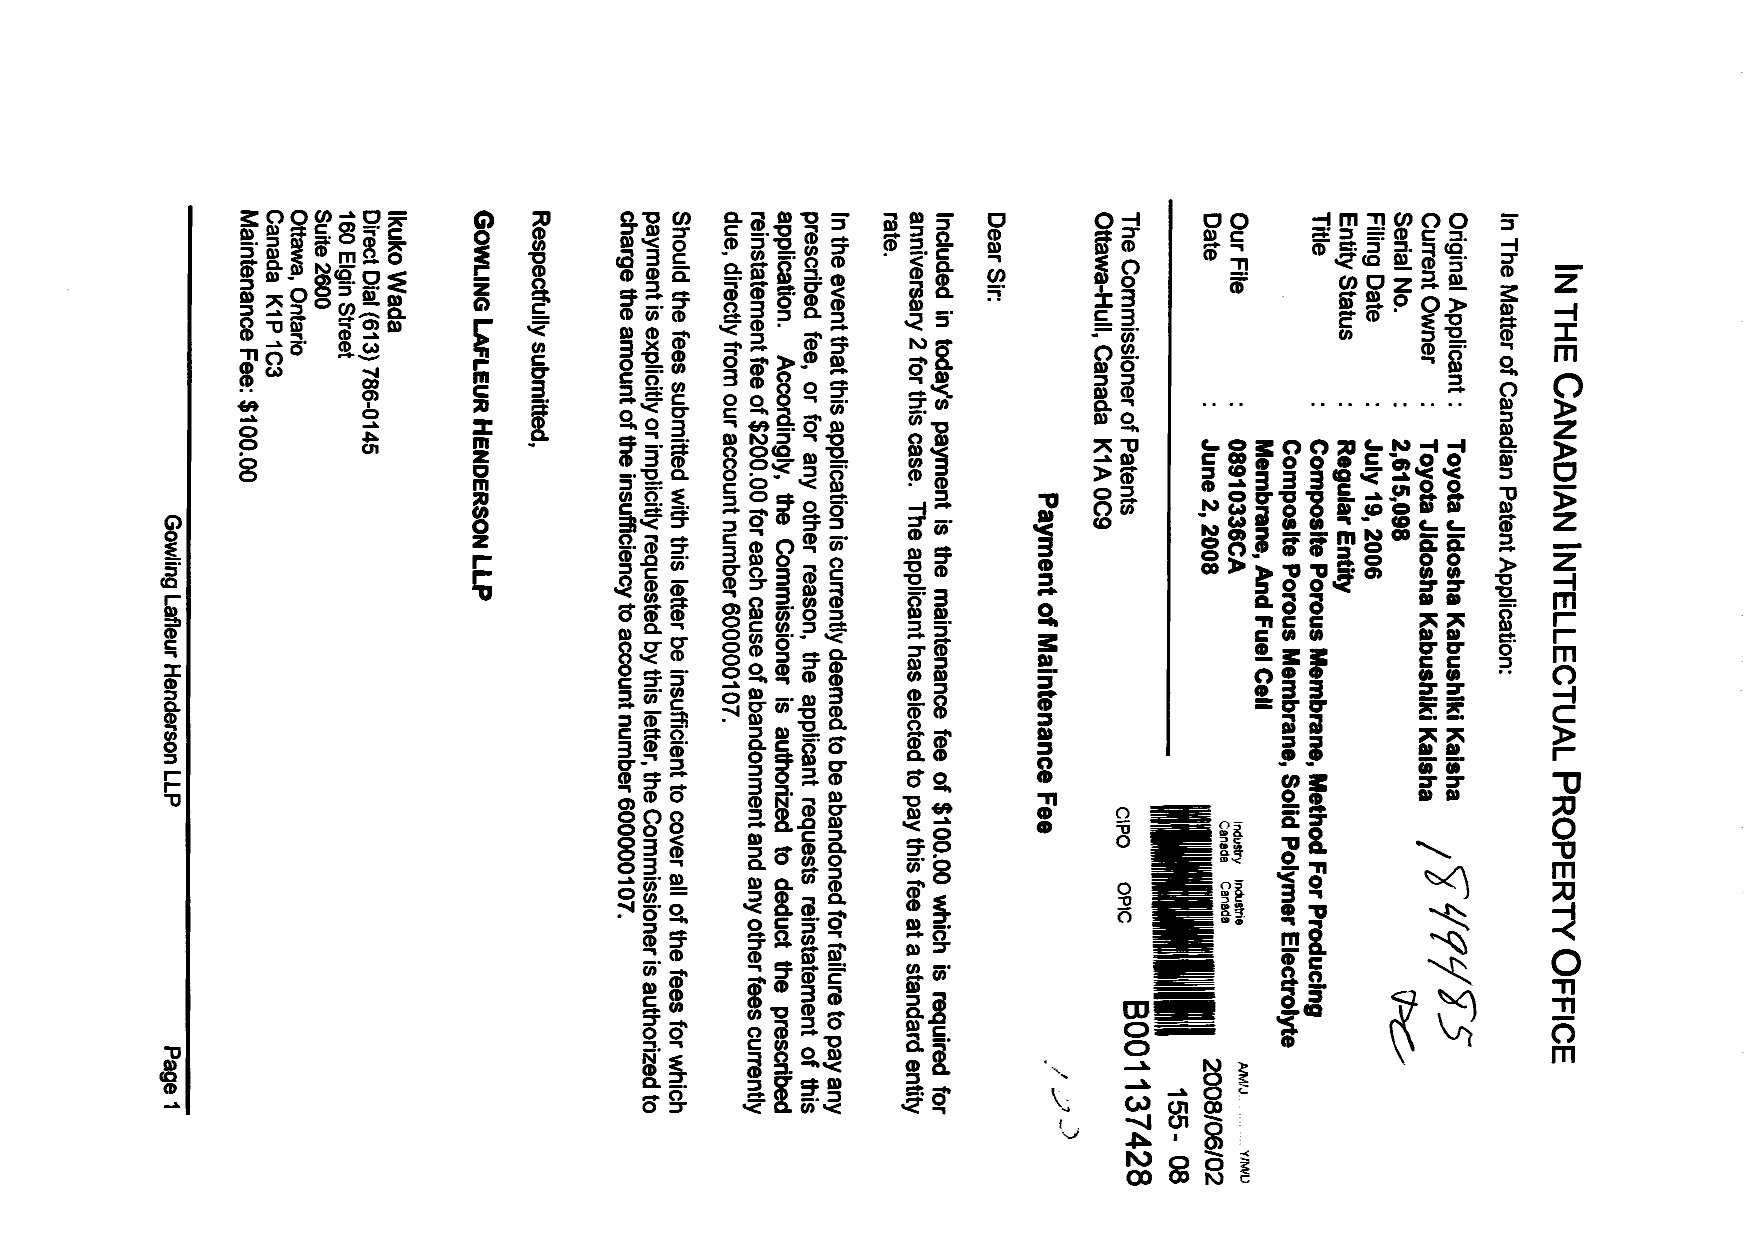 Canadian Patent Document 2615098. Fees 20071202. Image 1 of 1